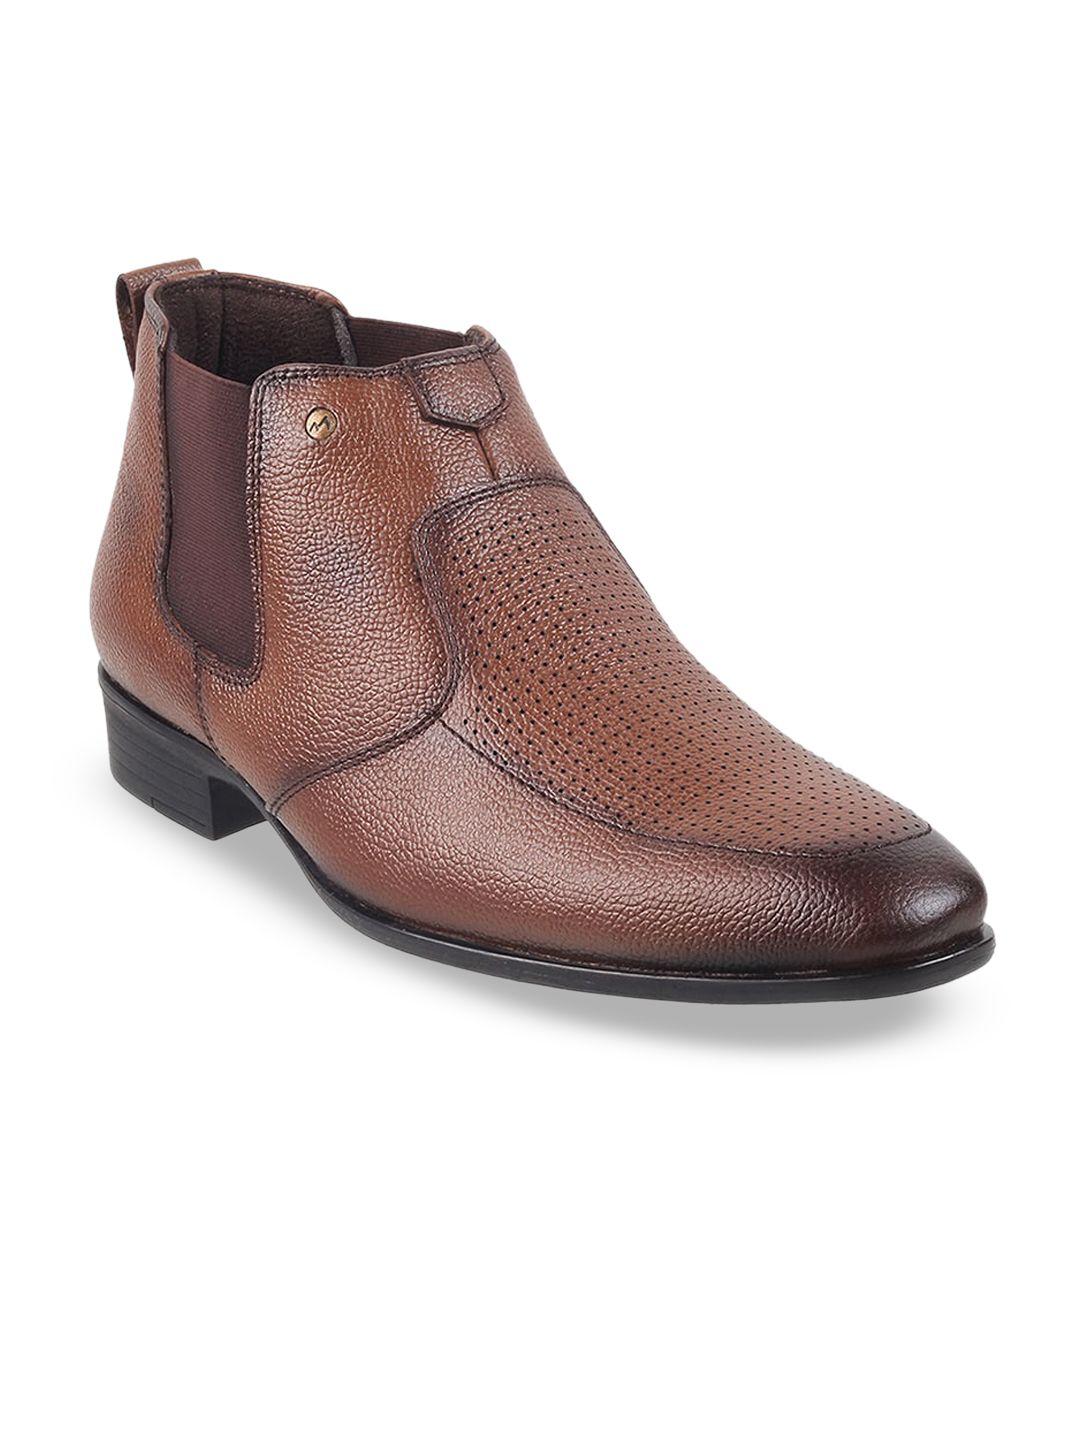 metro-men-textured-leather-formal-chelsea-boots